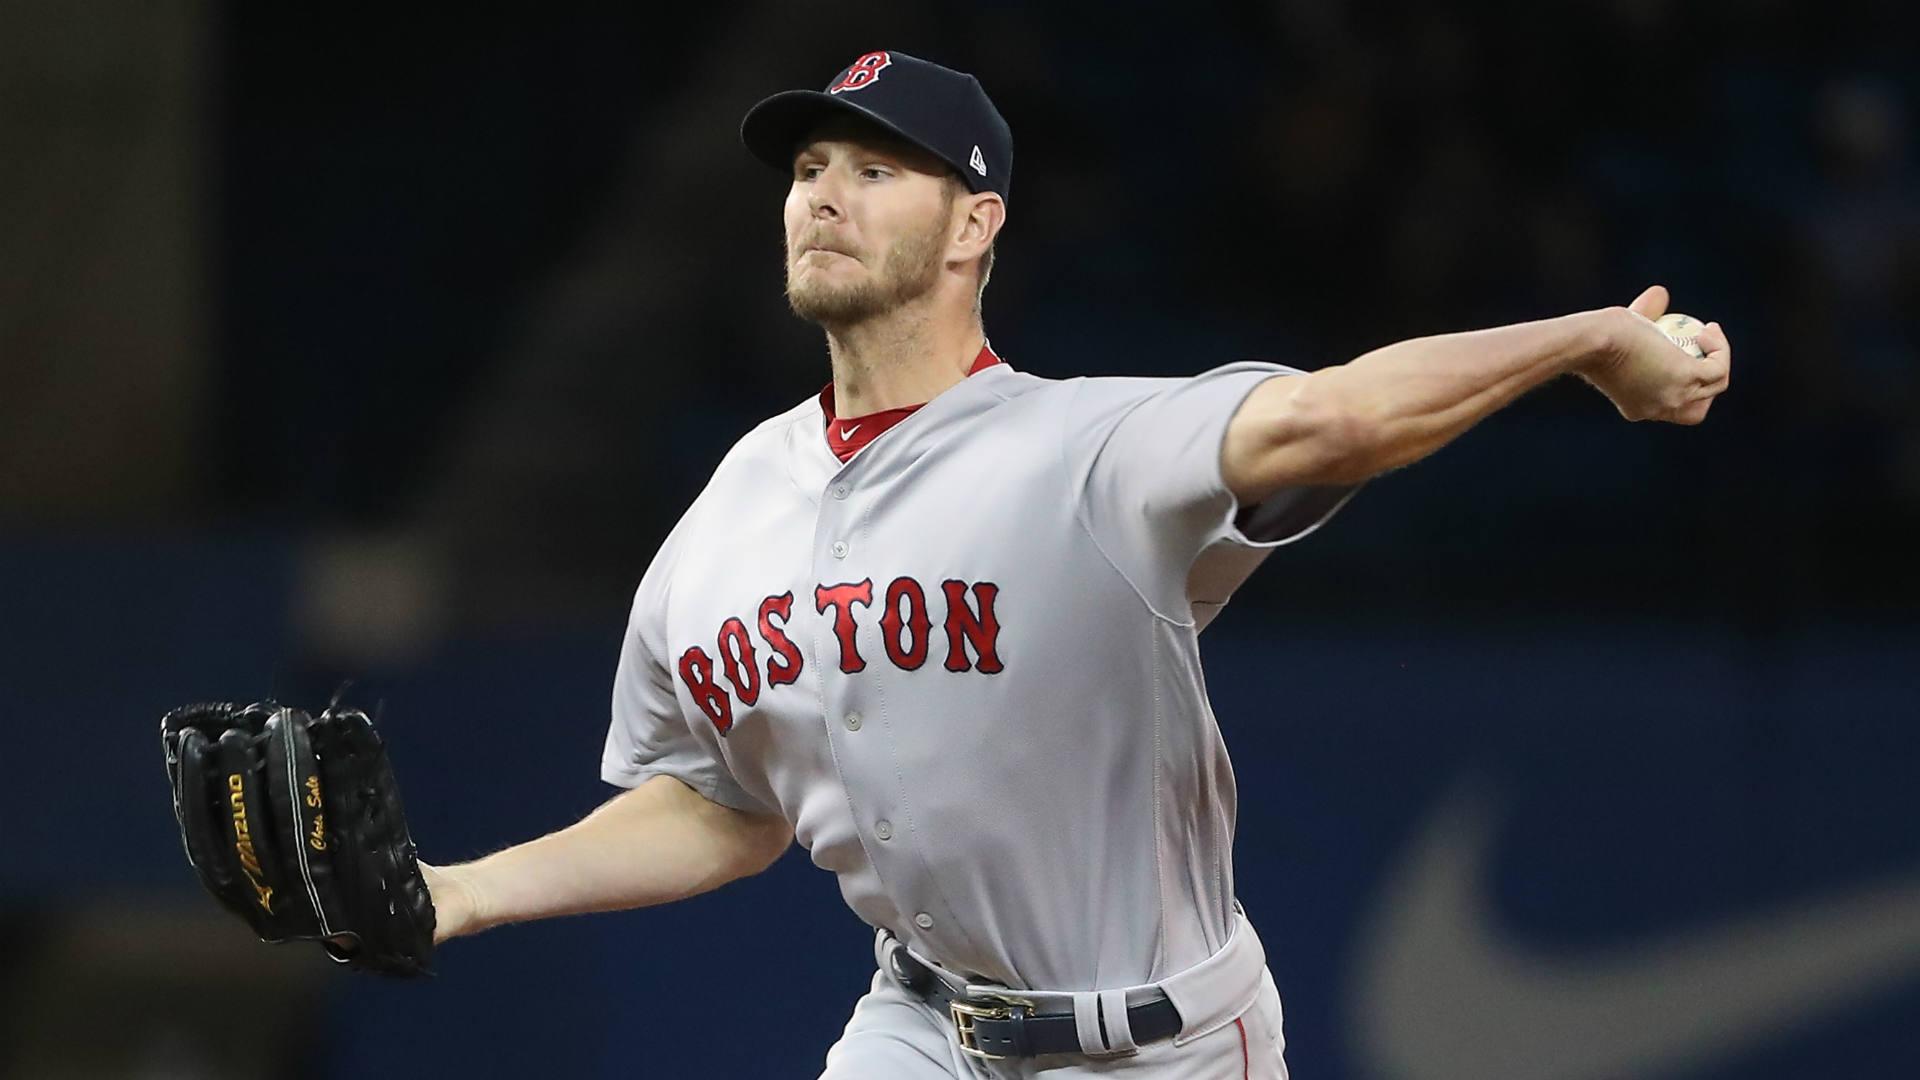 Chris Sale struck by line drive, leaves spring training start